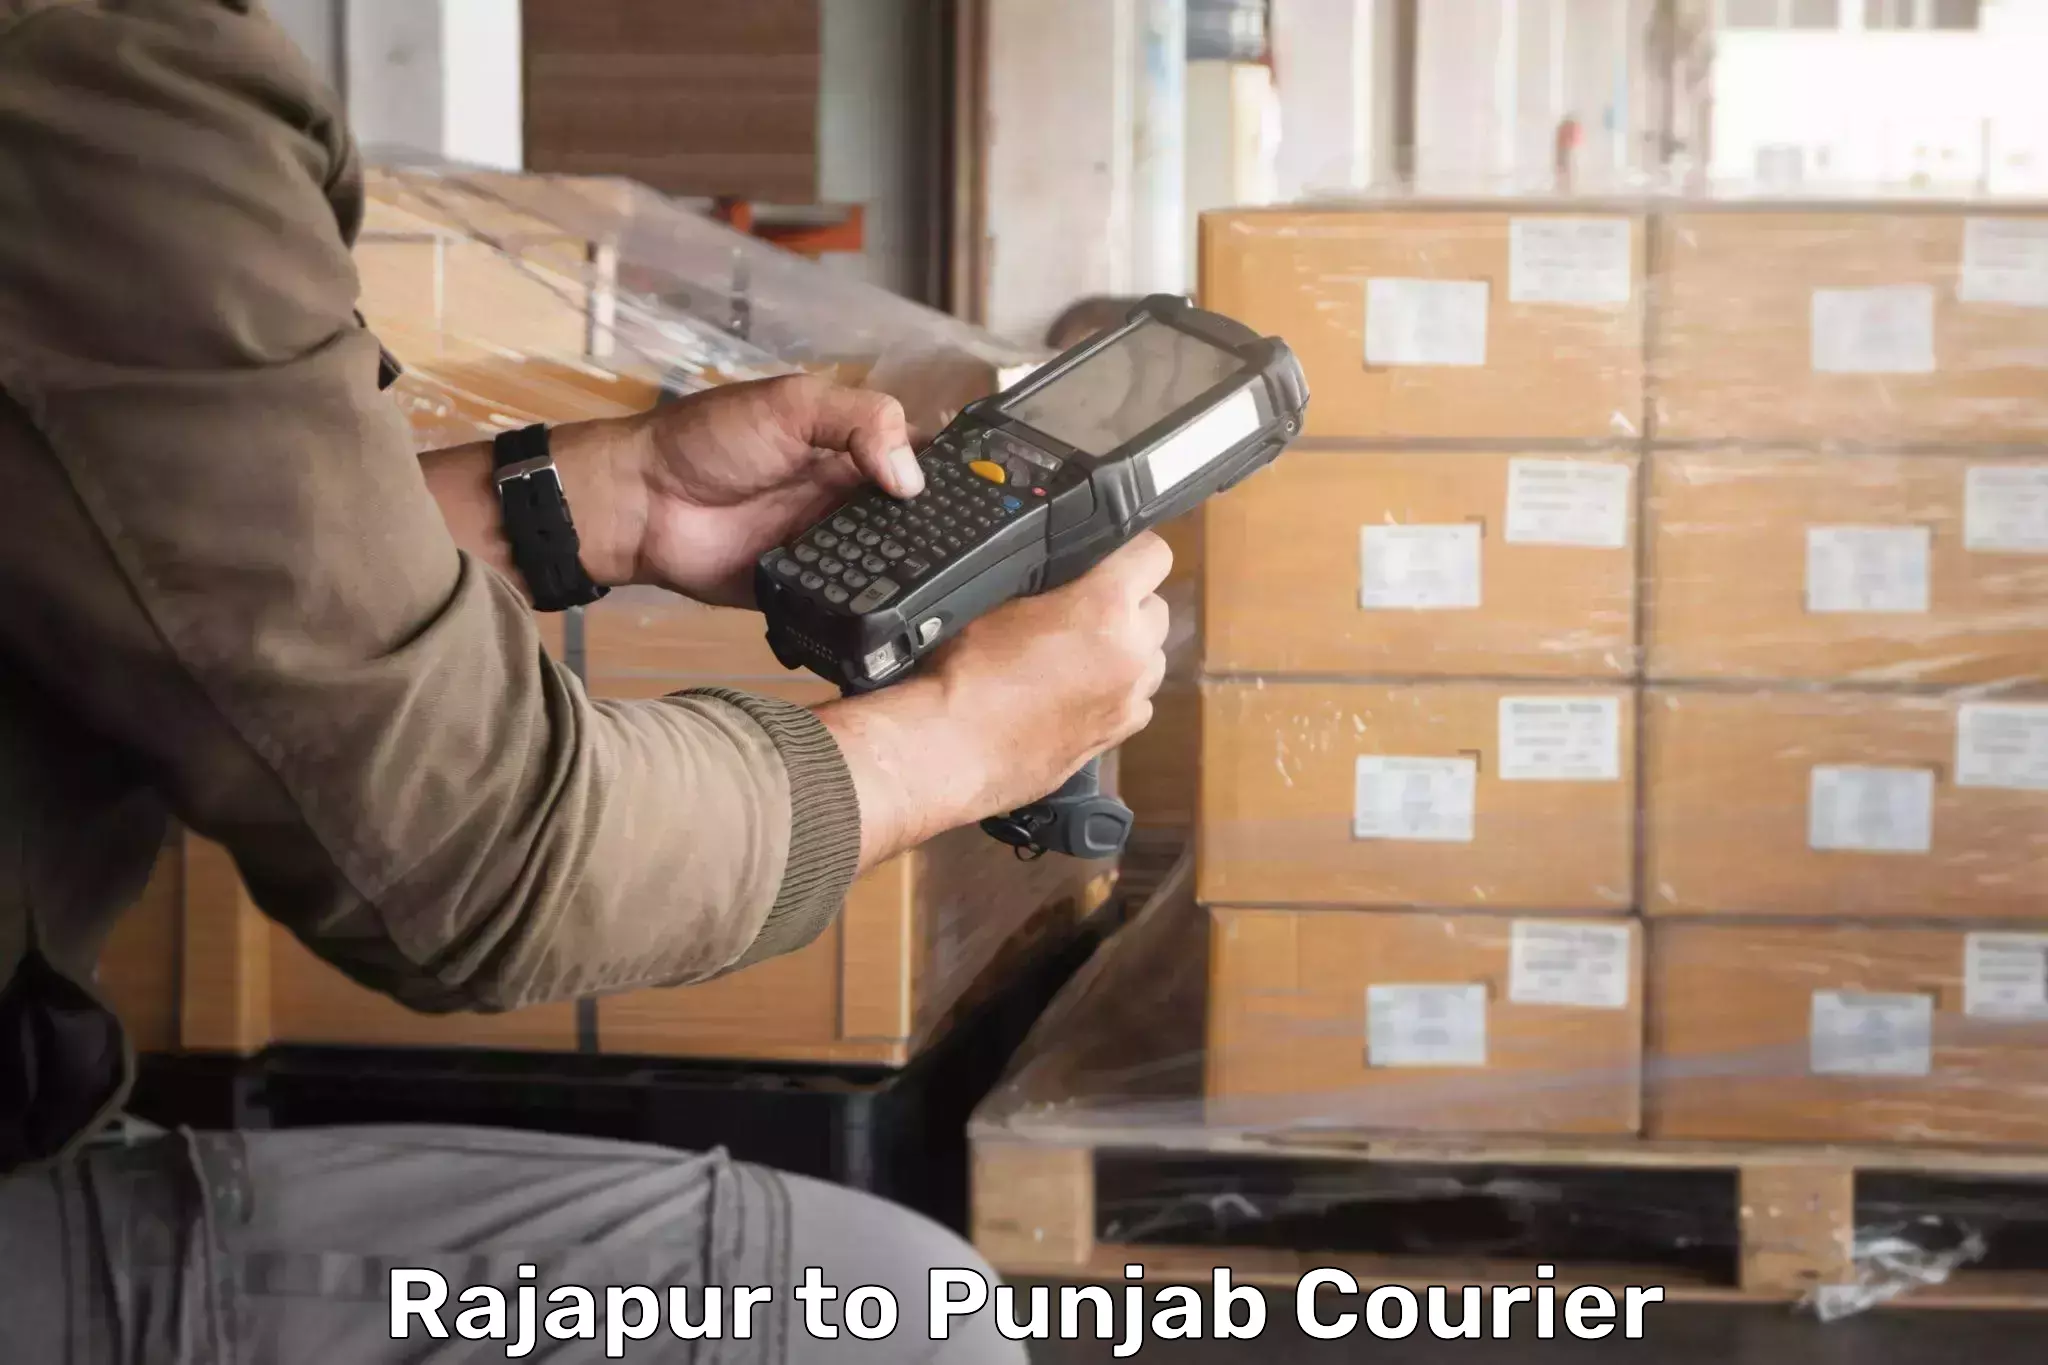 Quality courier services Rajapur to Amritsar